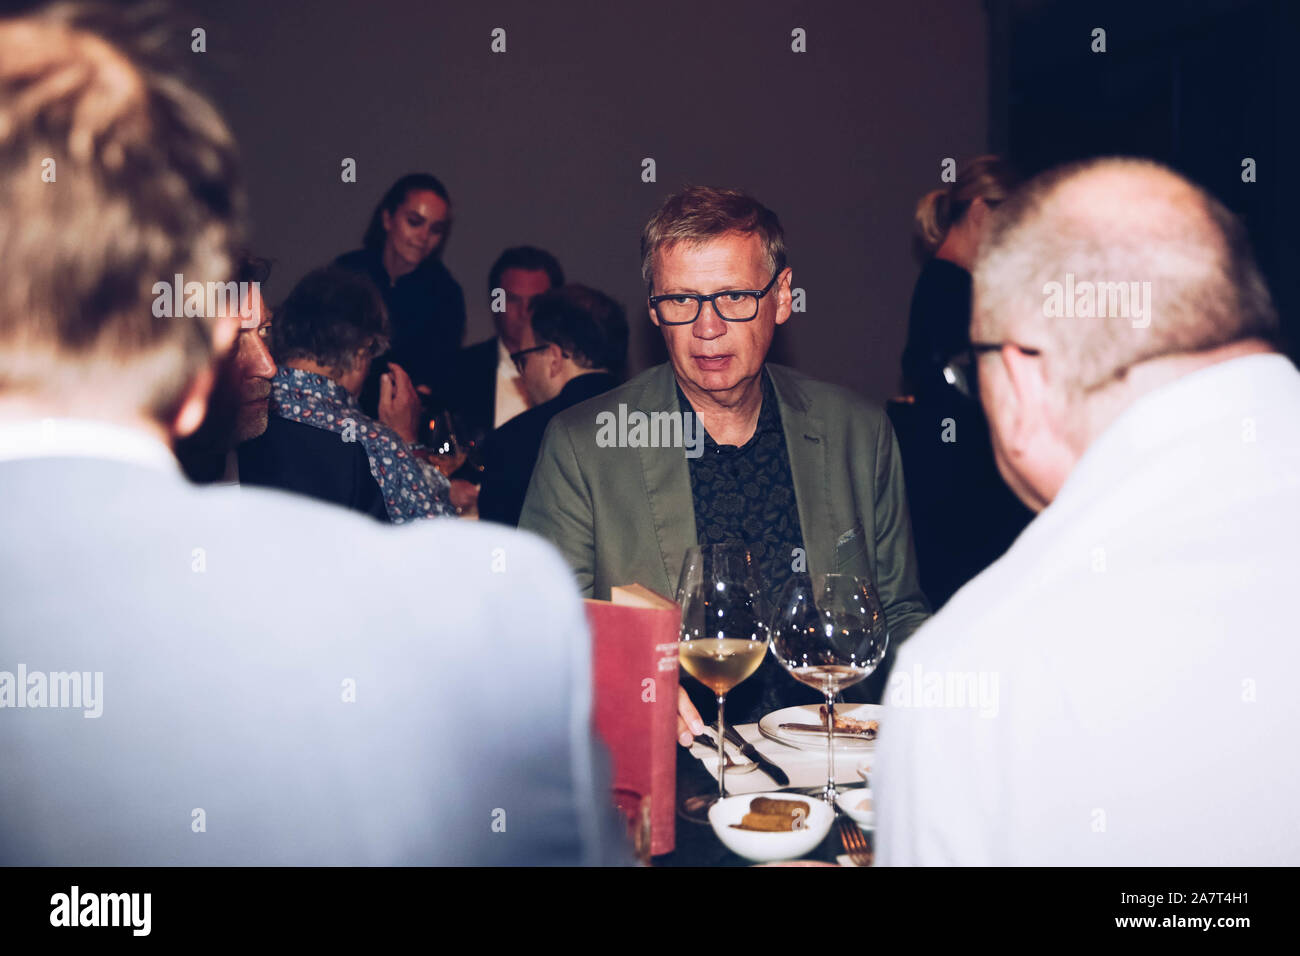 Potsdam, Germany. 13th Sep, 2019. Günther Jauch (M), entertainer, to guests at the opening of the restaurant "Villa Kellermann", which he runs in cooperation with top chef Tim Raue. has